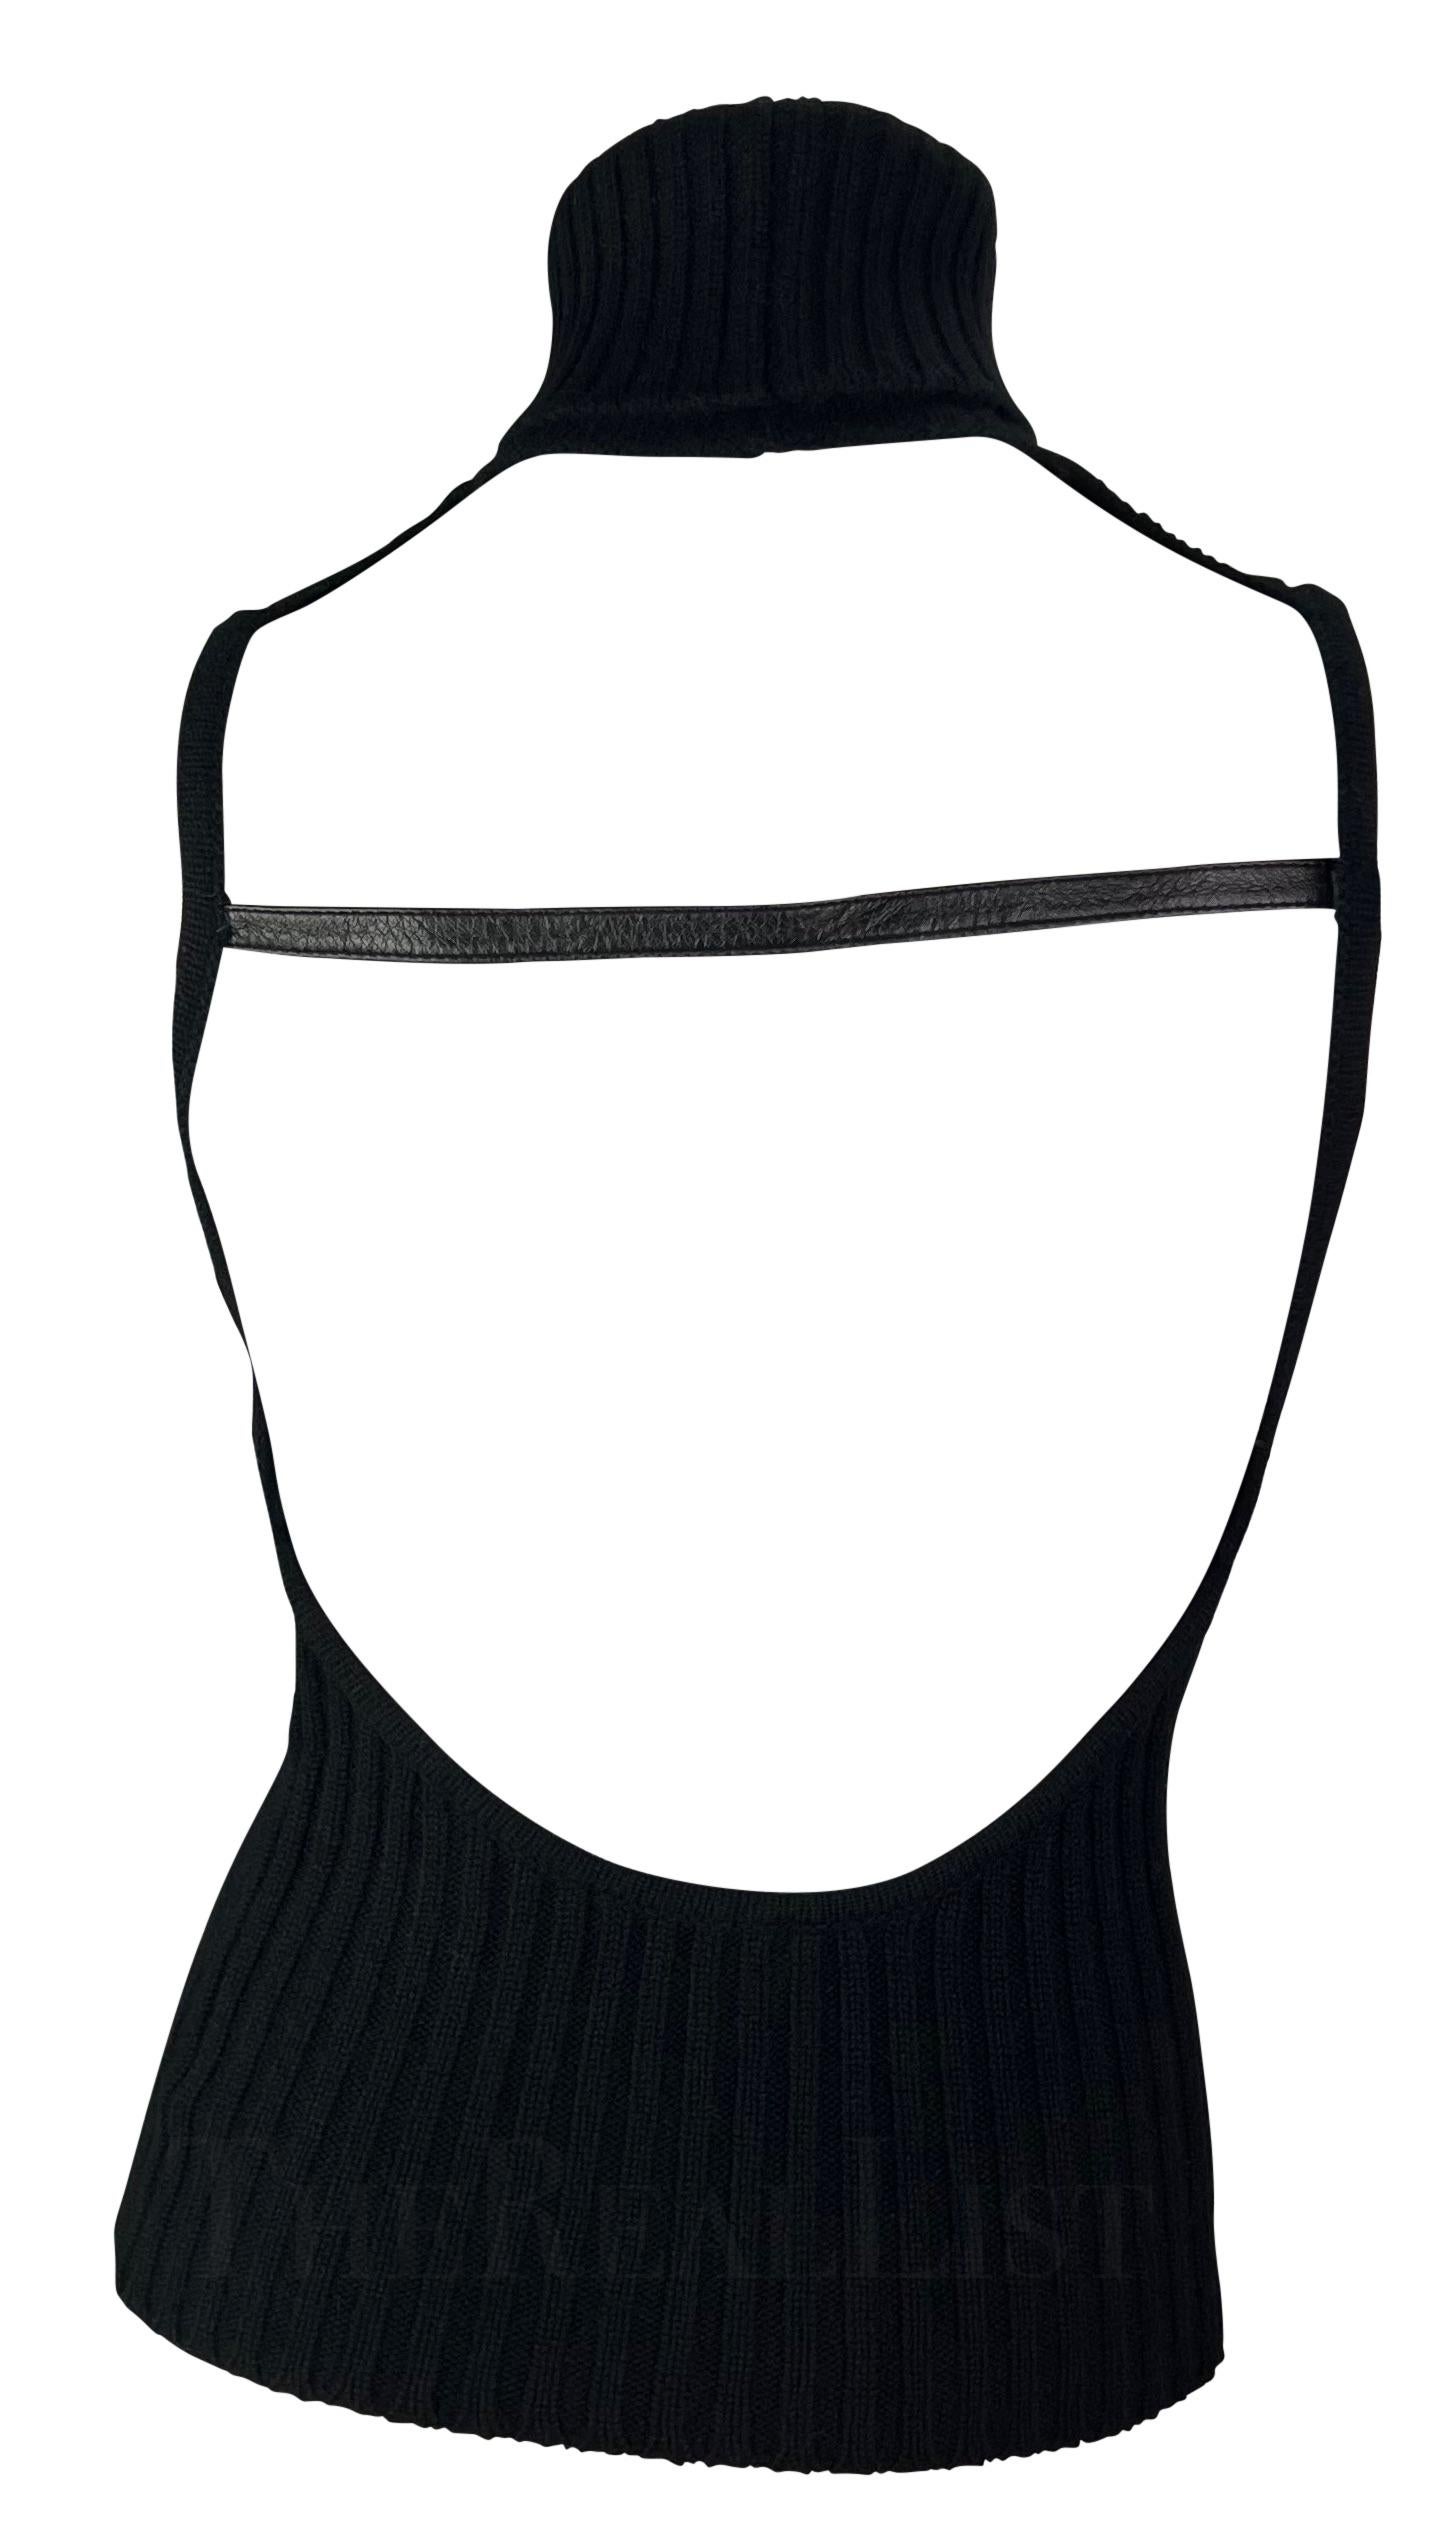 Presenting an incredible backless cashmere Gucci turtleneck top, designed by Tom Ford. From the late 1990s, this sensual top is constructed entirely of black cashmere. Not your average turtleneck sweater, this ultra-sexy sleeveless and backless top